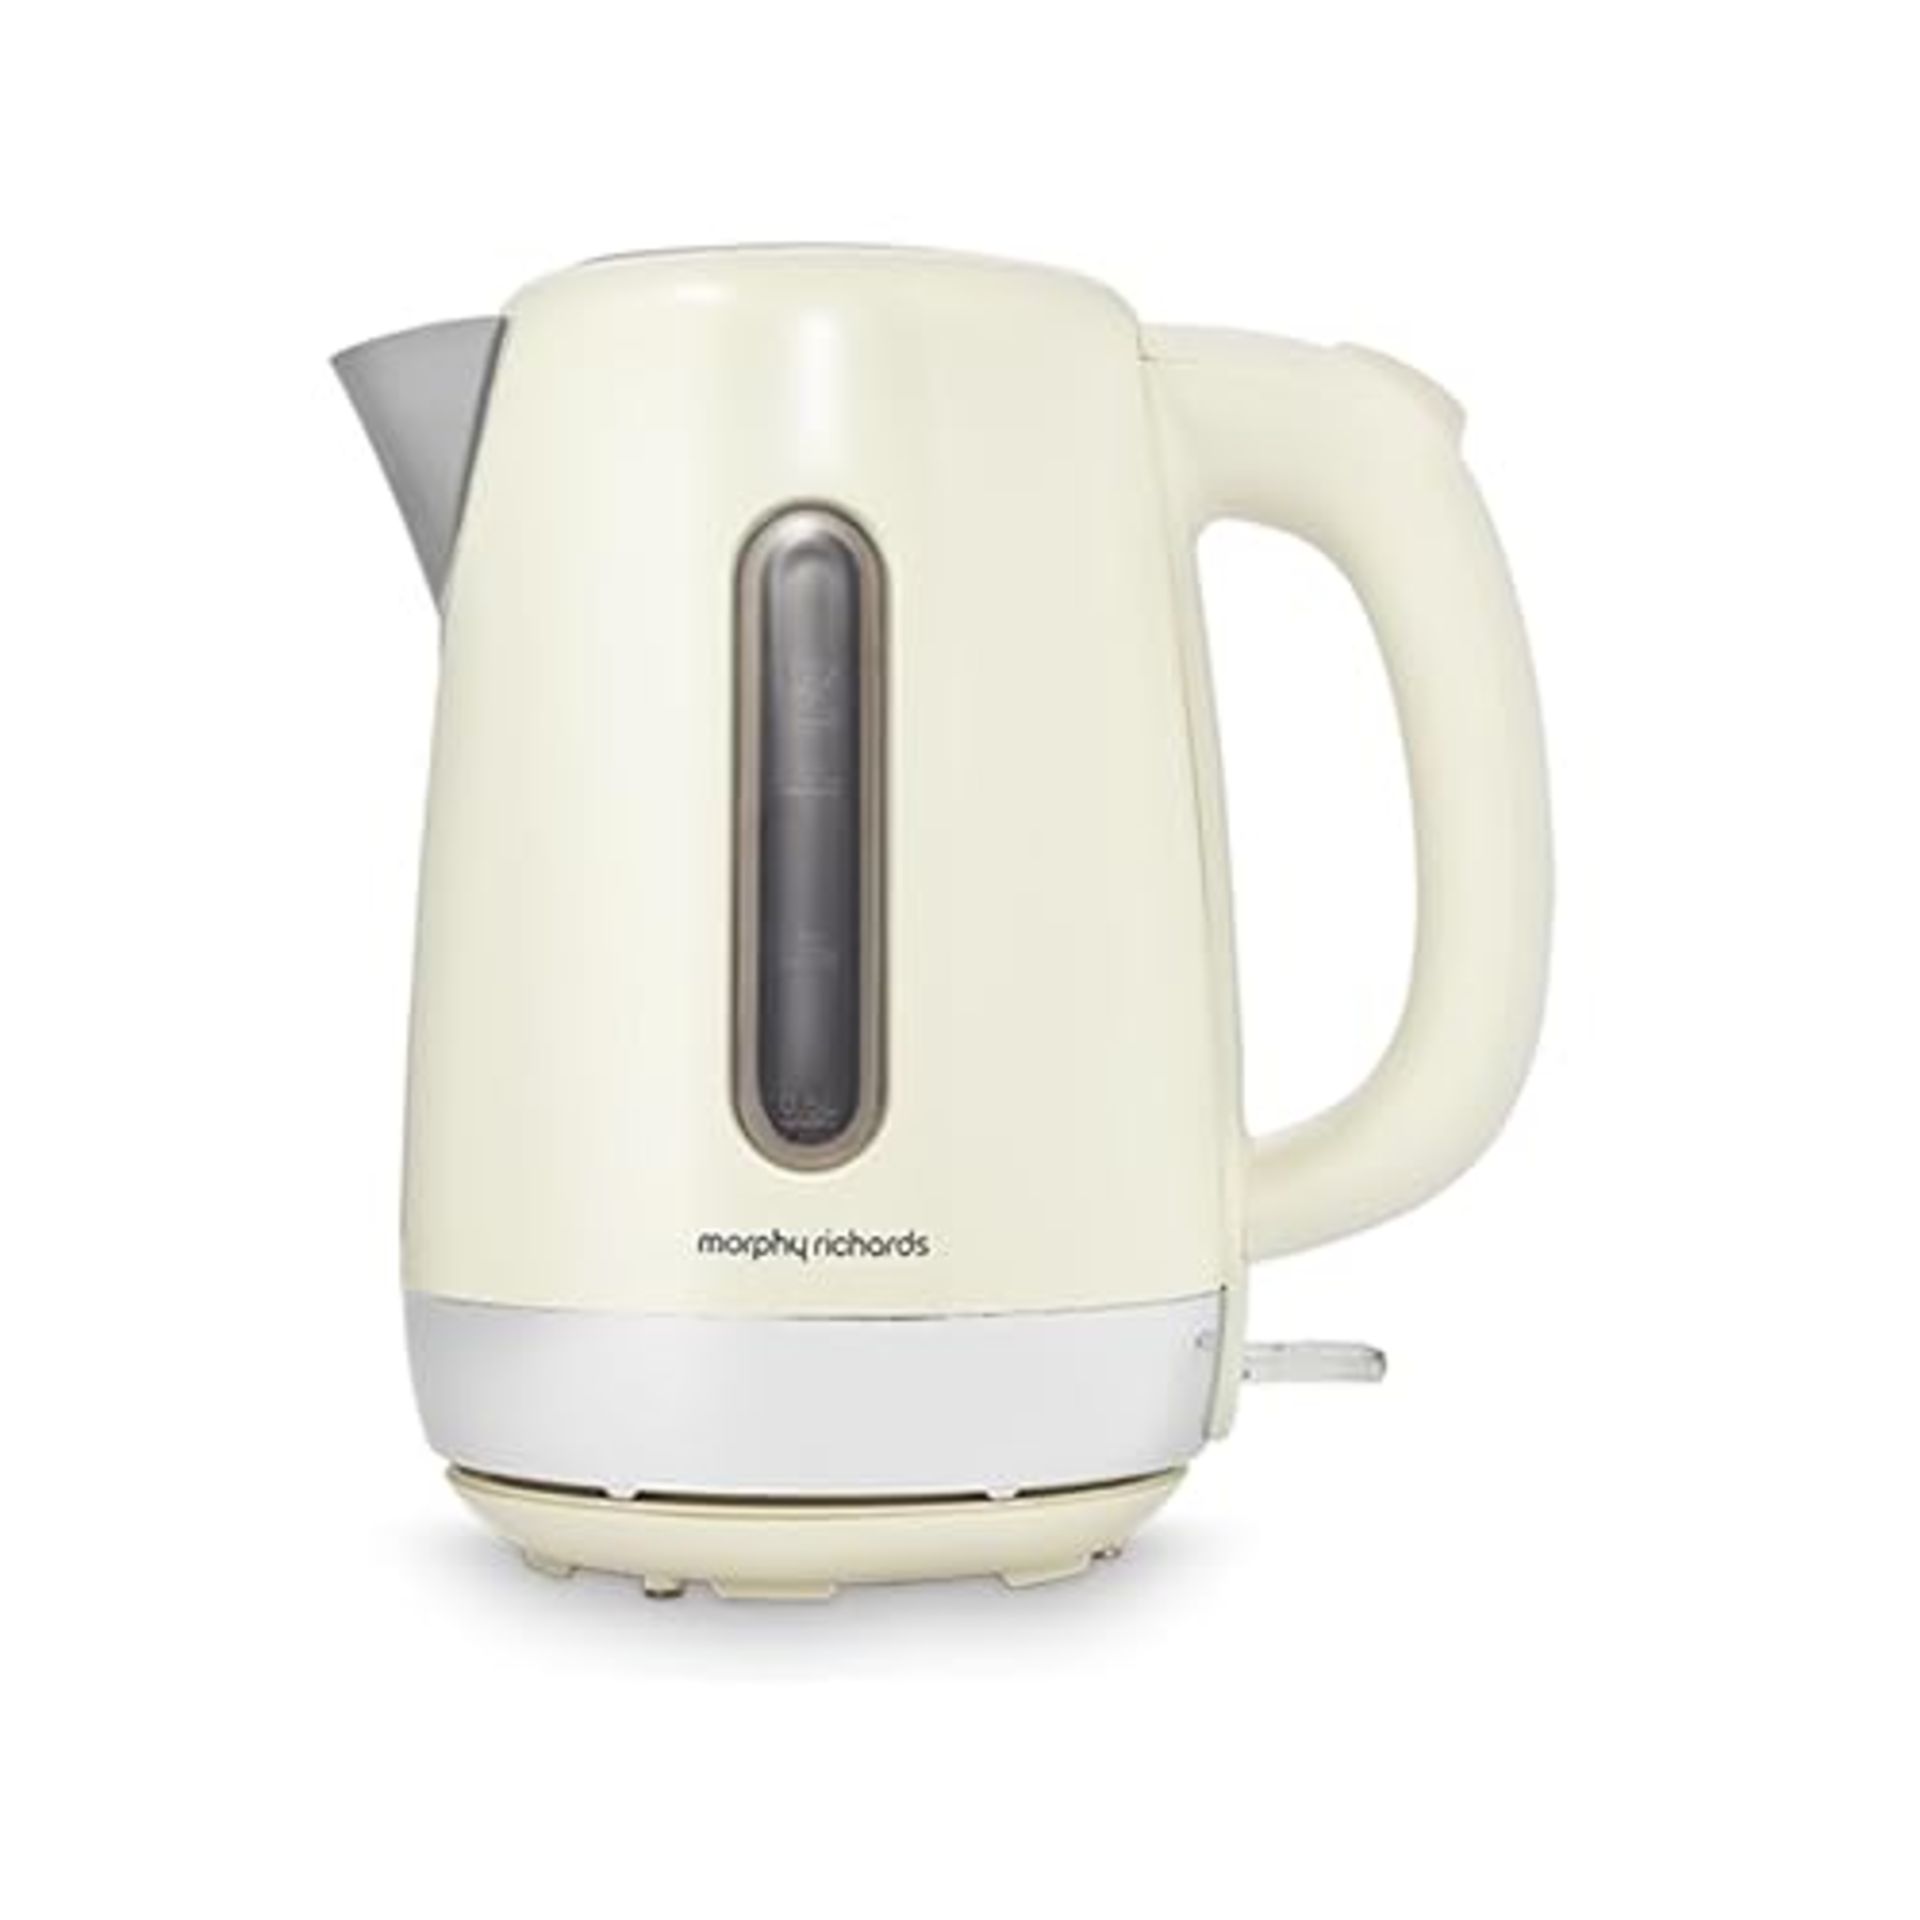 Morphy Richards 102784 Cream Equip Stainless Steel Jug Kettle, 3000 W, 1.7 Litre, Cream